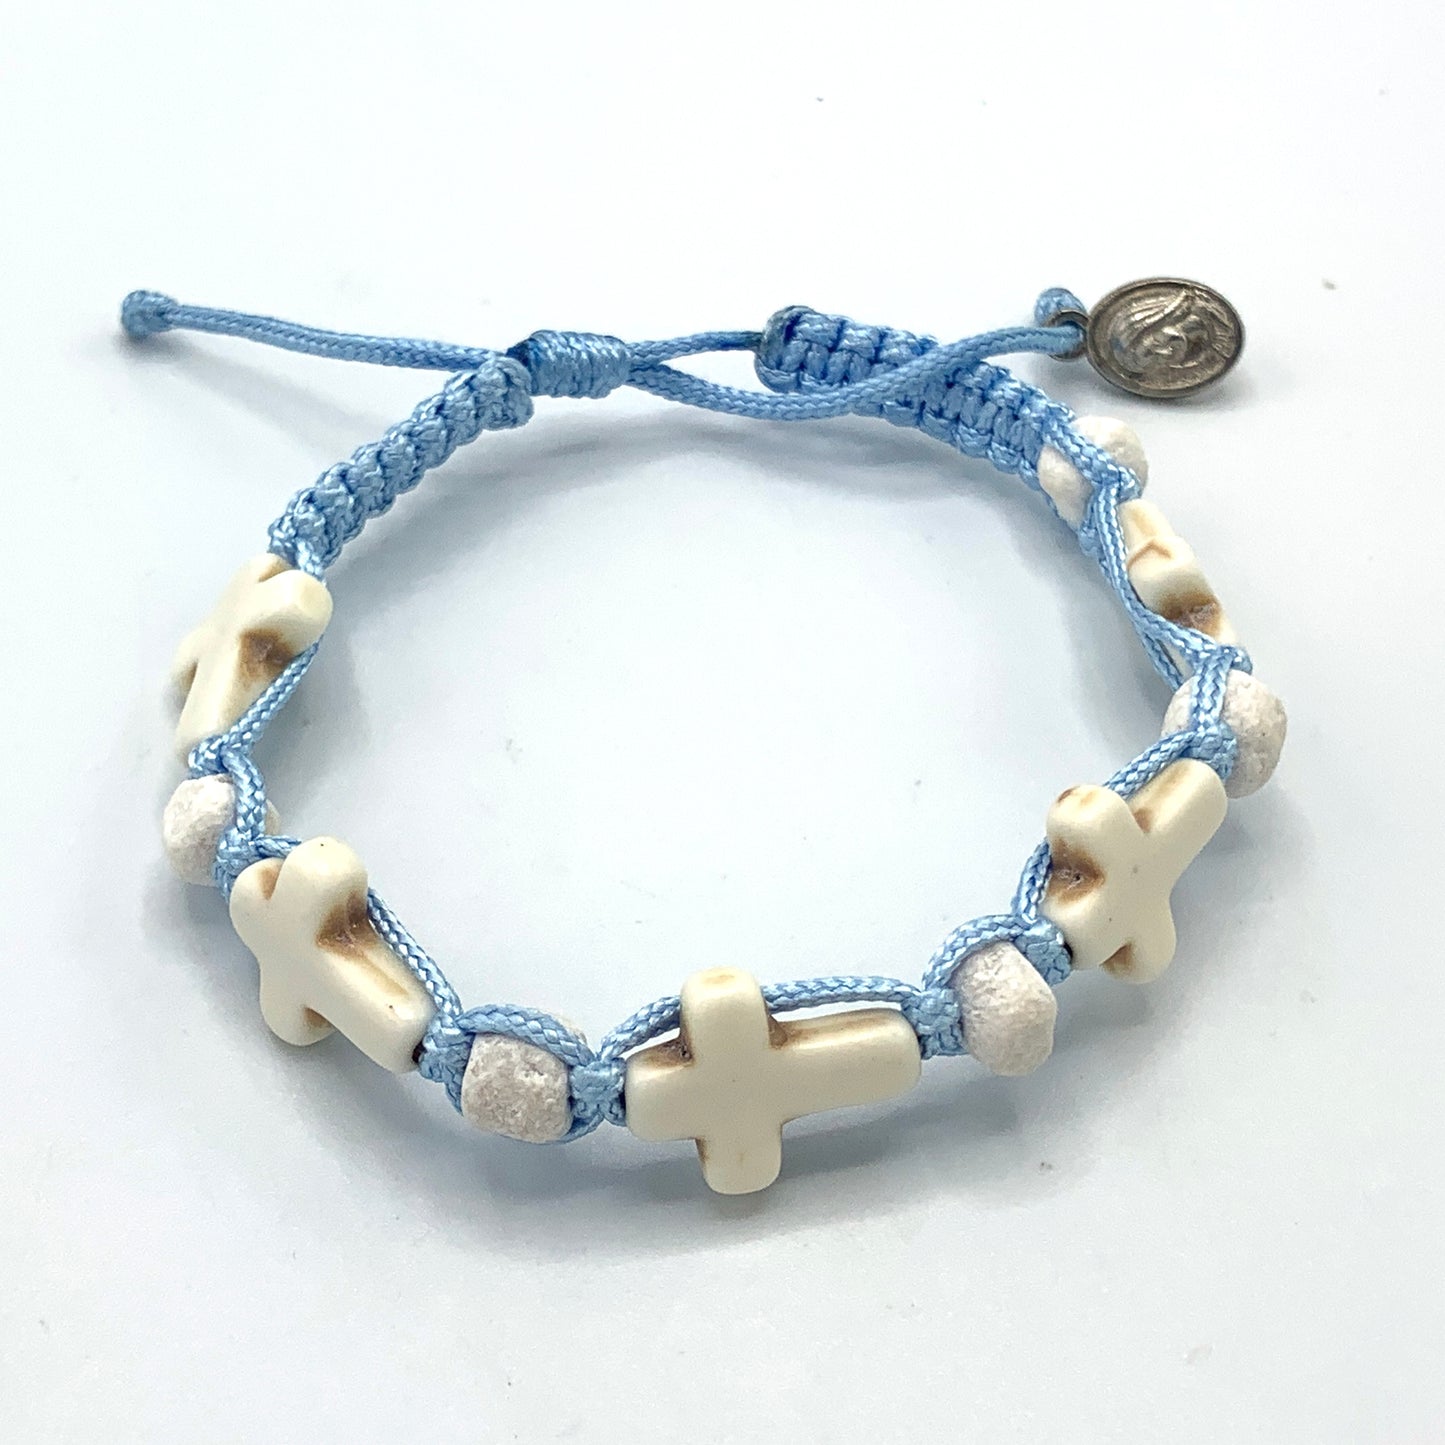 Stone Cross and Bead Bracelet of Assorted Colors